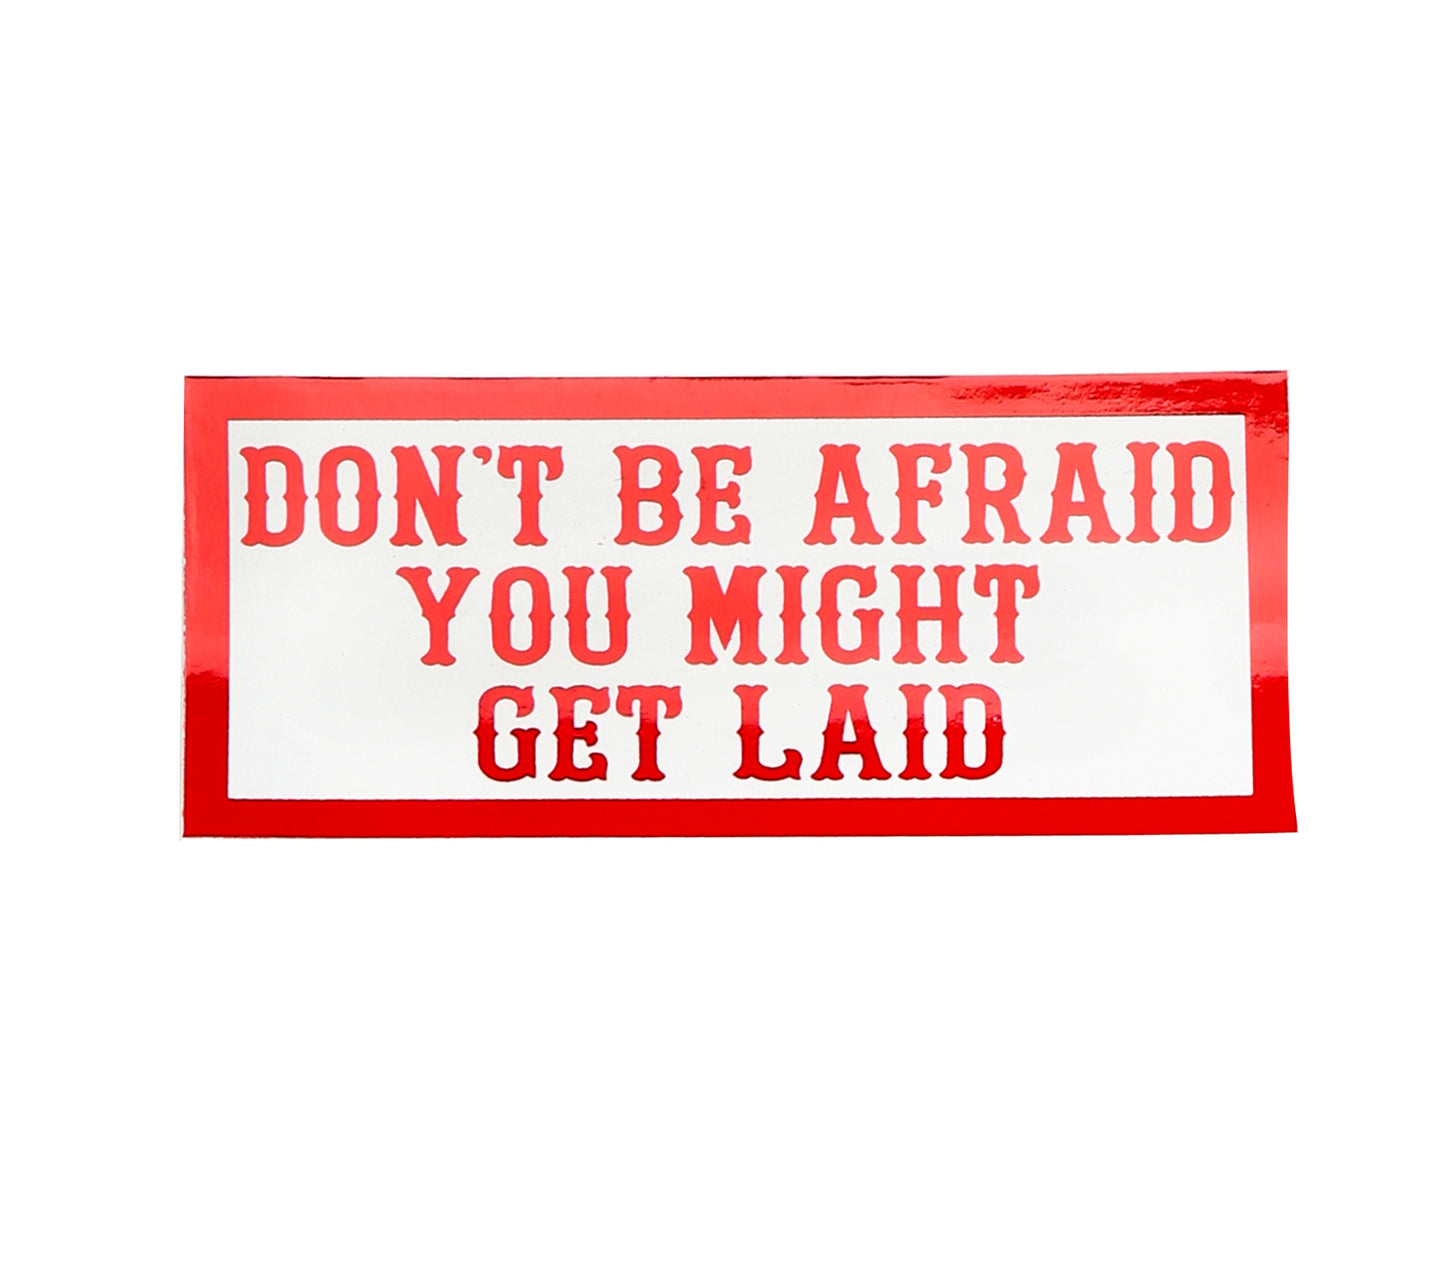 Sticker - DON’T BE AFRAID YOU MIGHT GET LAID